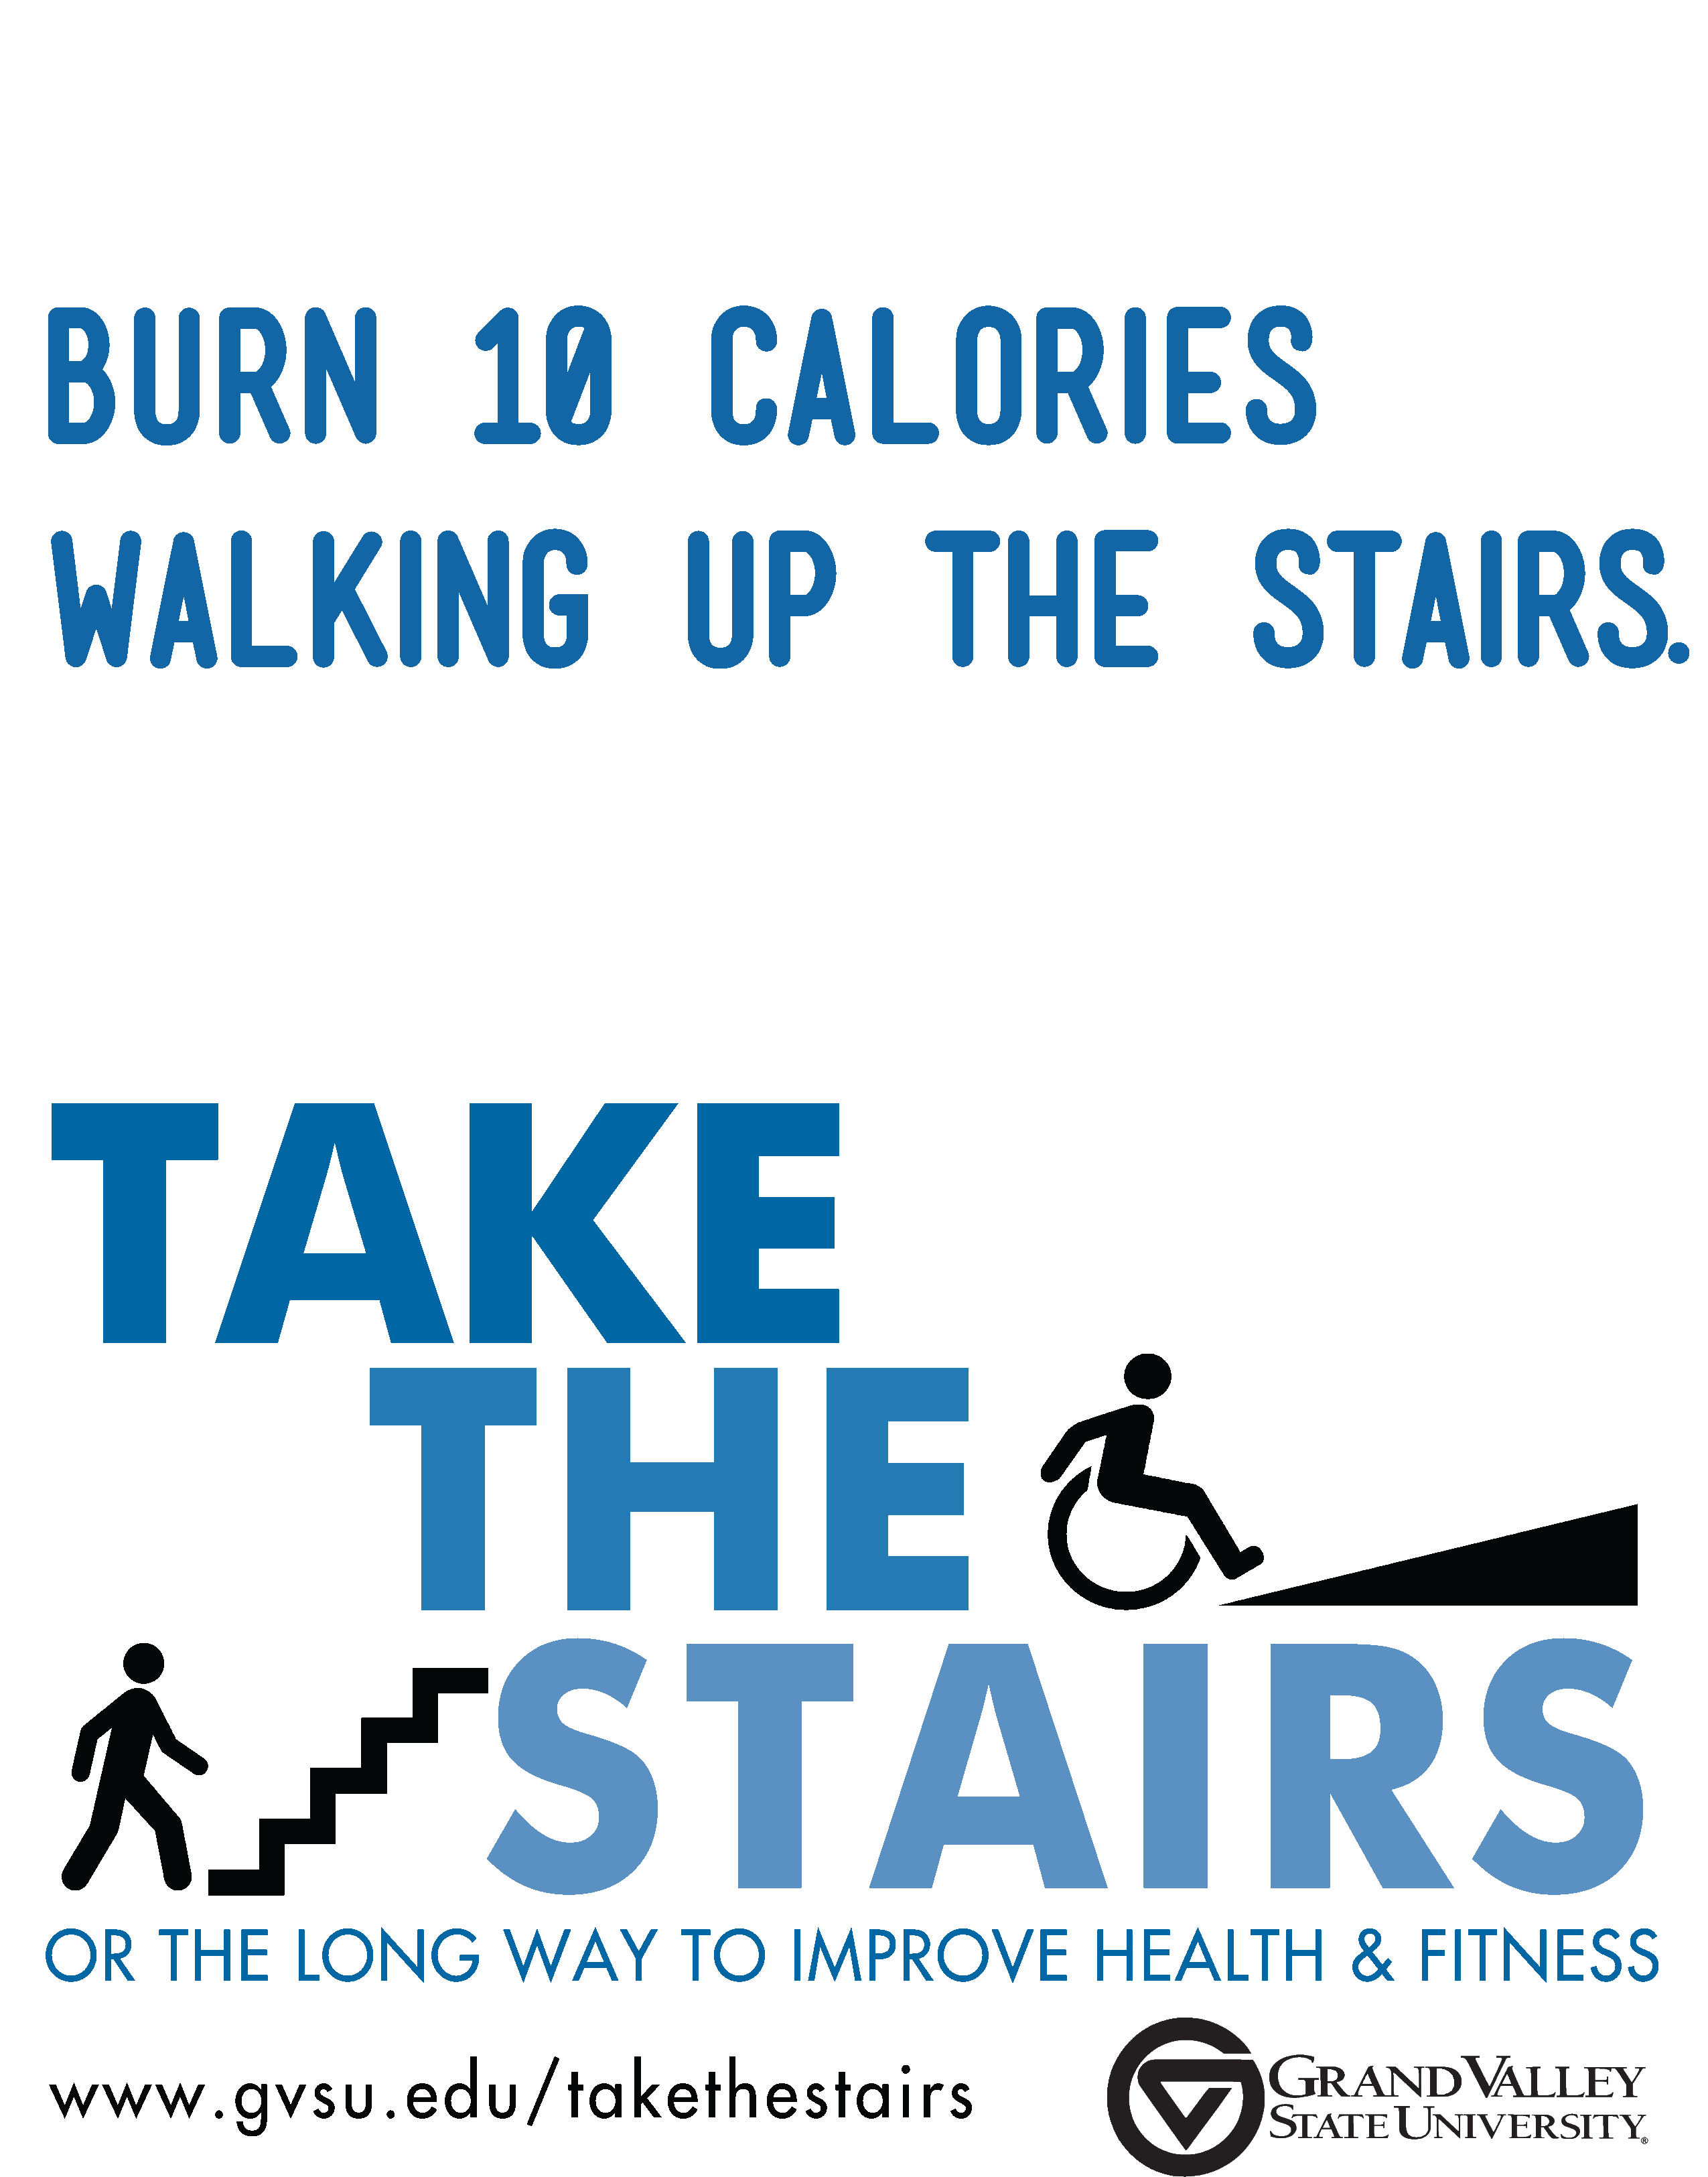 Burn 10 Calories Walking Up the Stairs: Take The Stairs